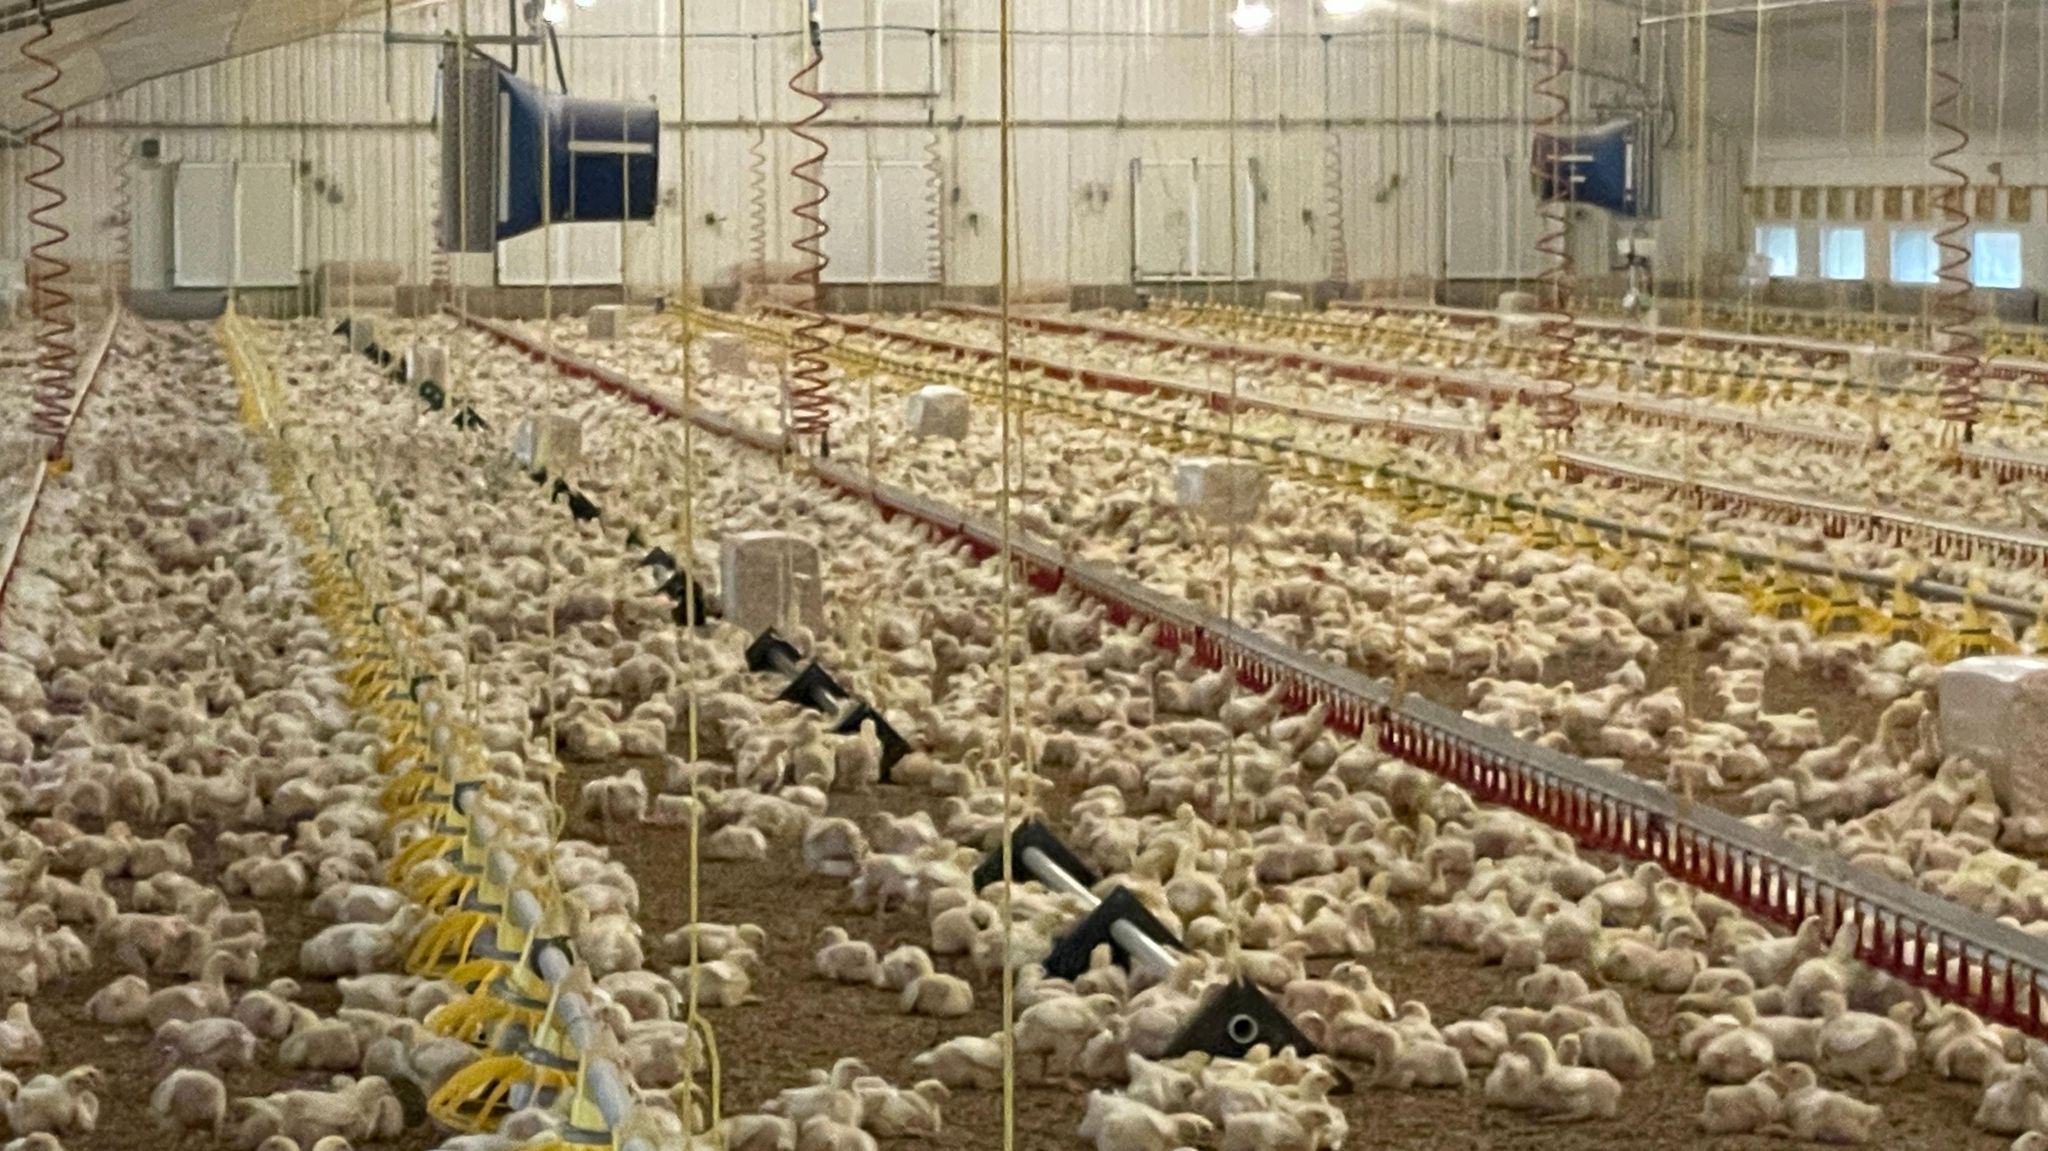 Chickens being produced in a large unit